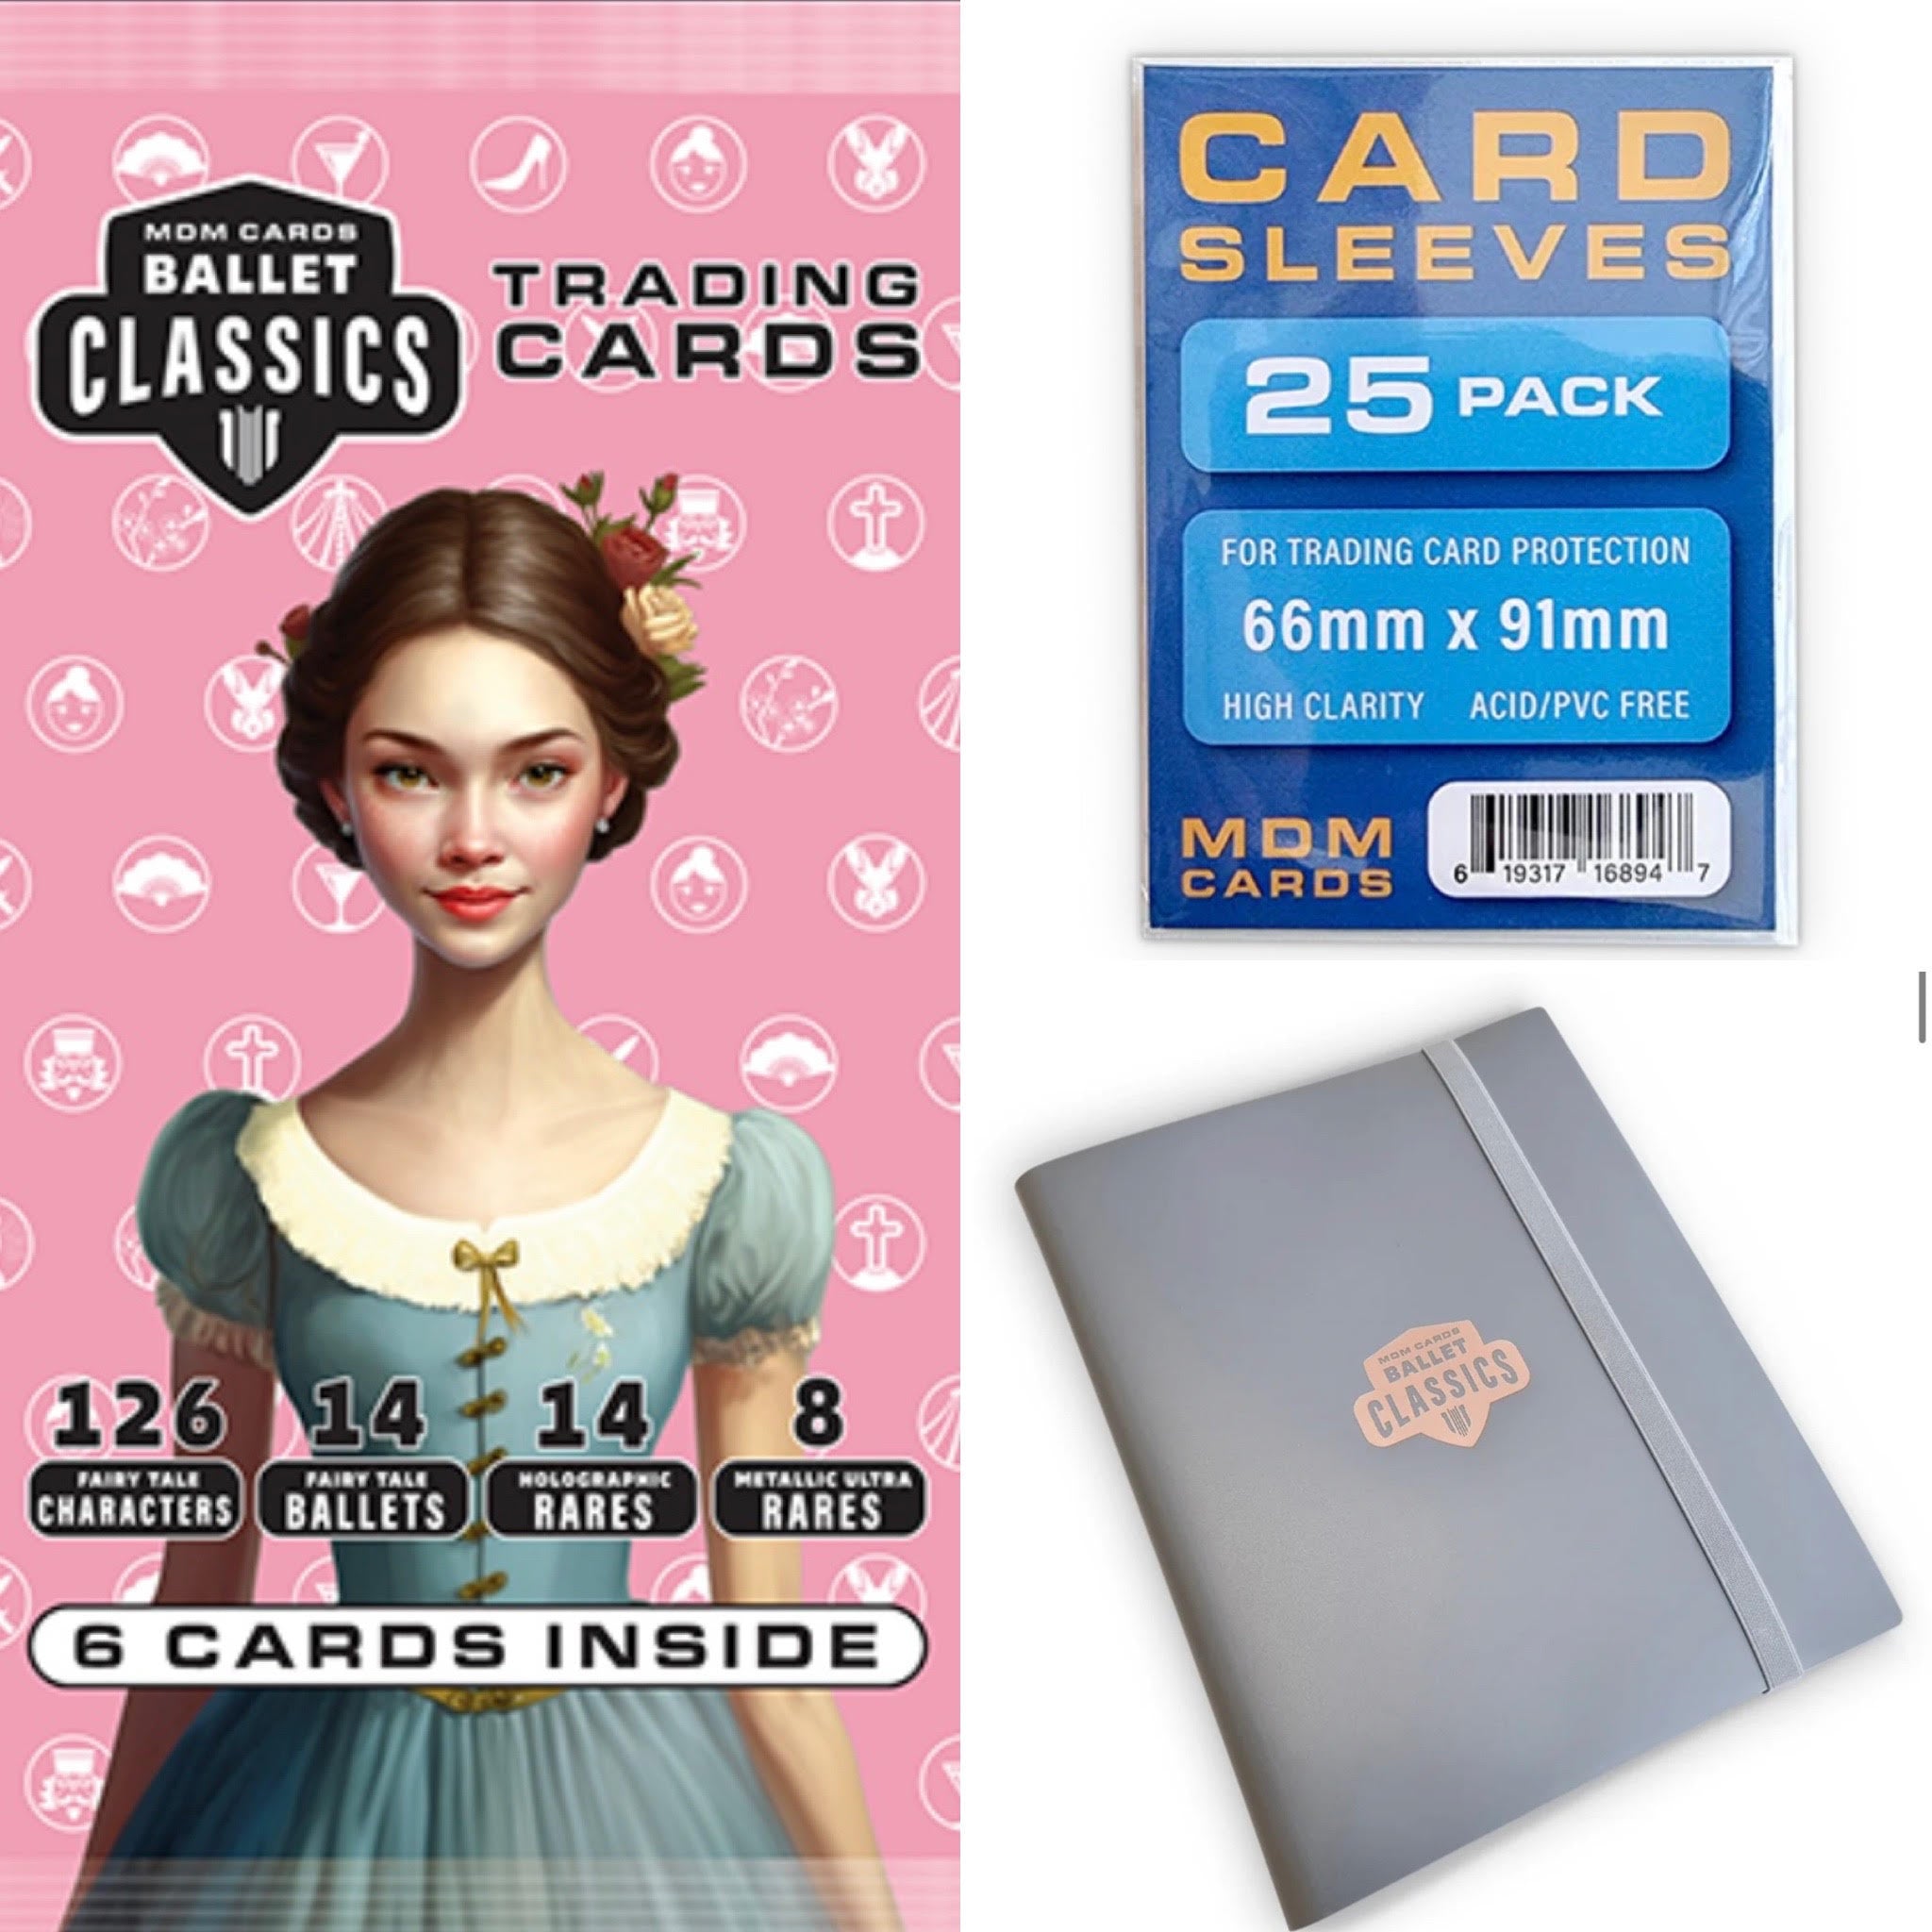 Trading Cards Ballet Classics - Starter Pack - Only $34.95!